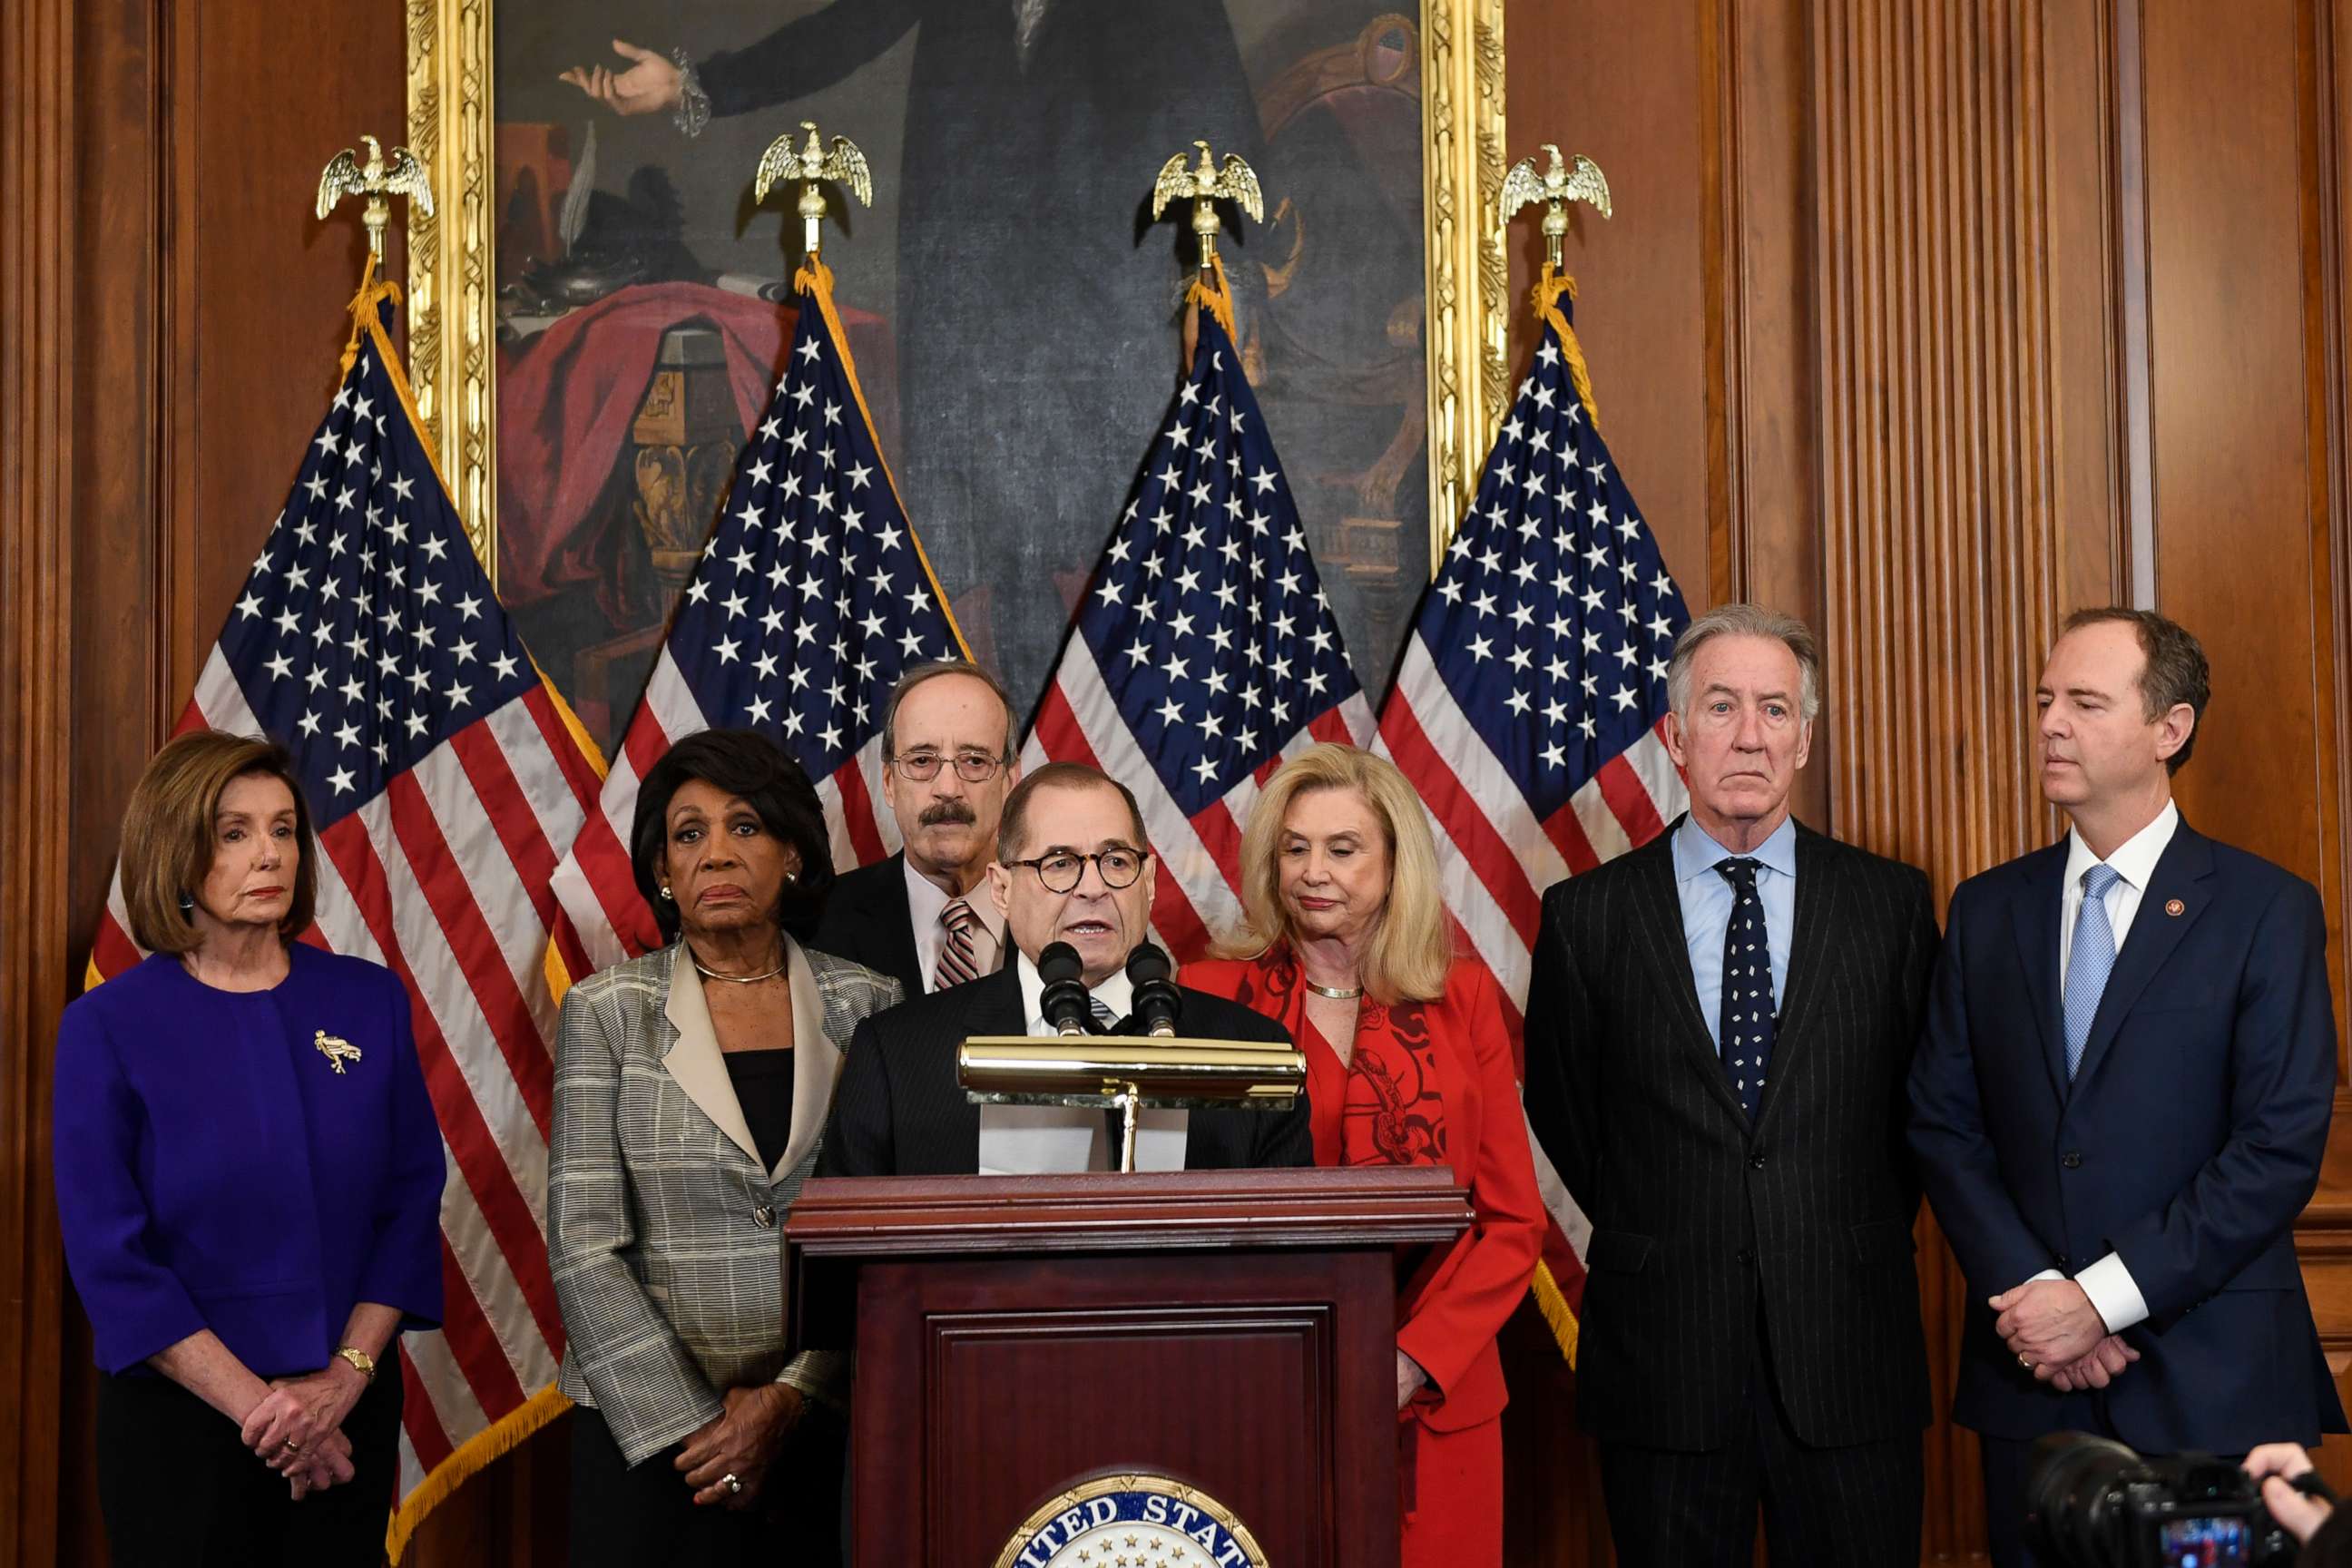 PHOTO: A news conference on Capitol Hill in Washington, Dec. 10, 2019.